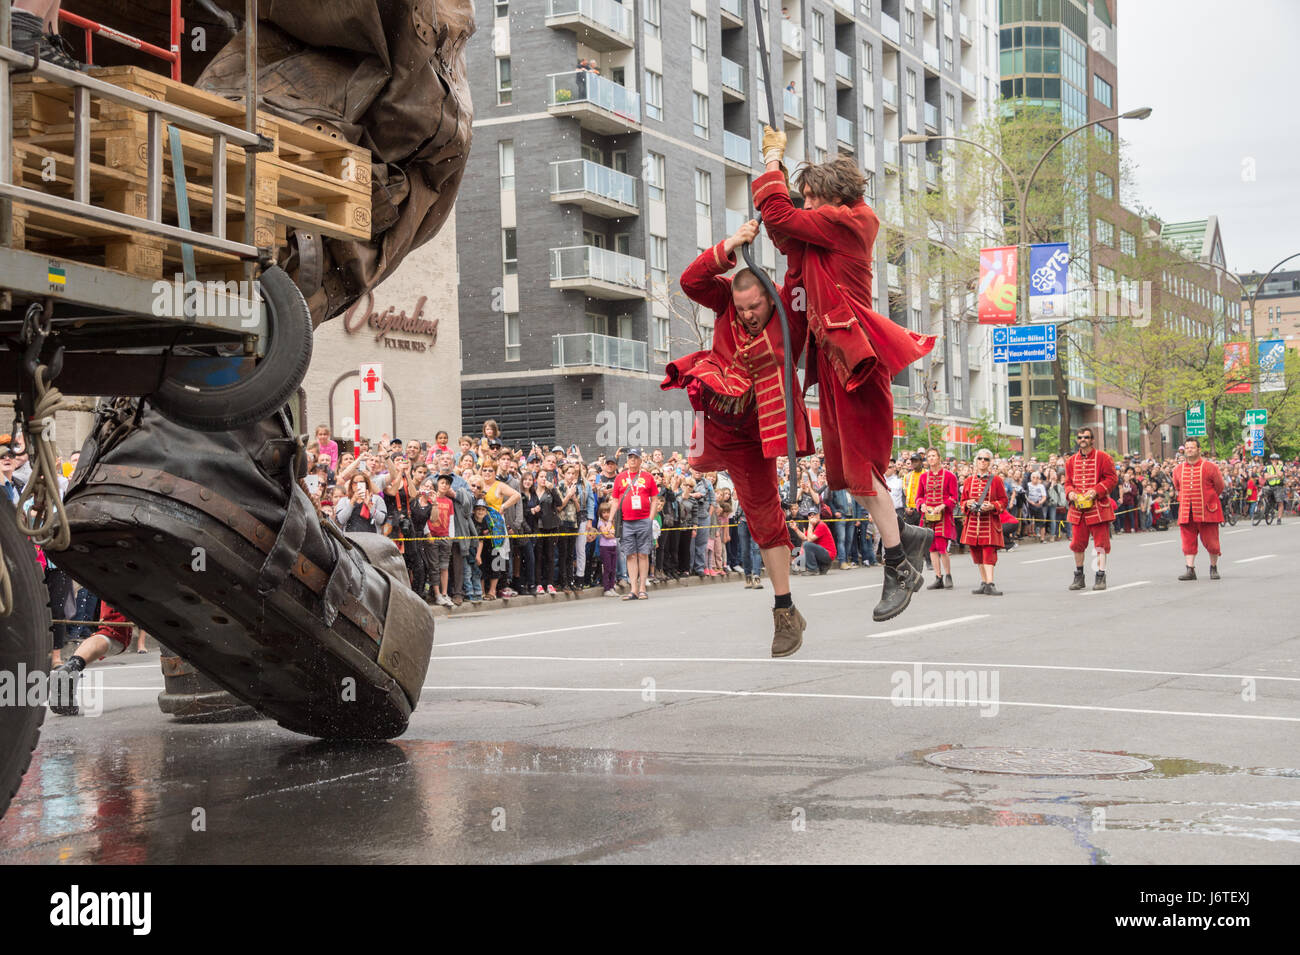 Montreal, Canada. 21 May 2017. Royal de Luxe Giants as part of the commemorations of the 375th anniversary of Montreal Credit: Marc Bruxelle/Alamy Live News Stock Photo